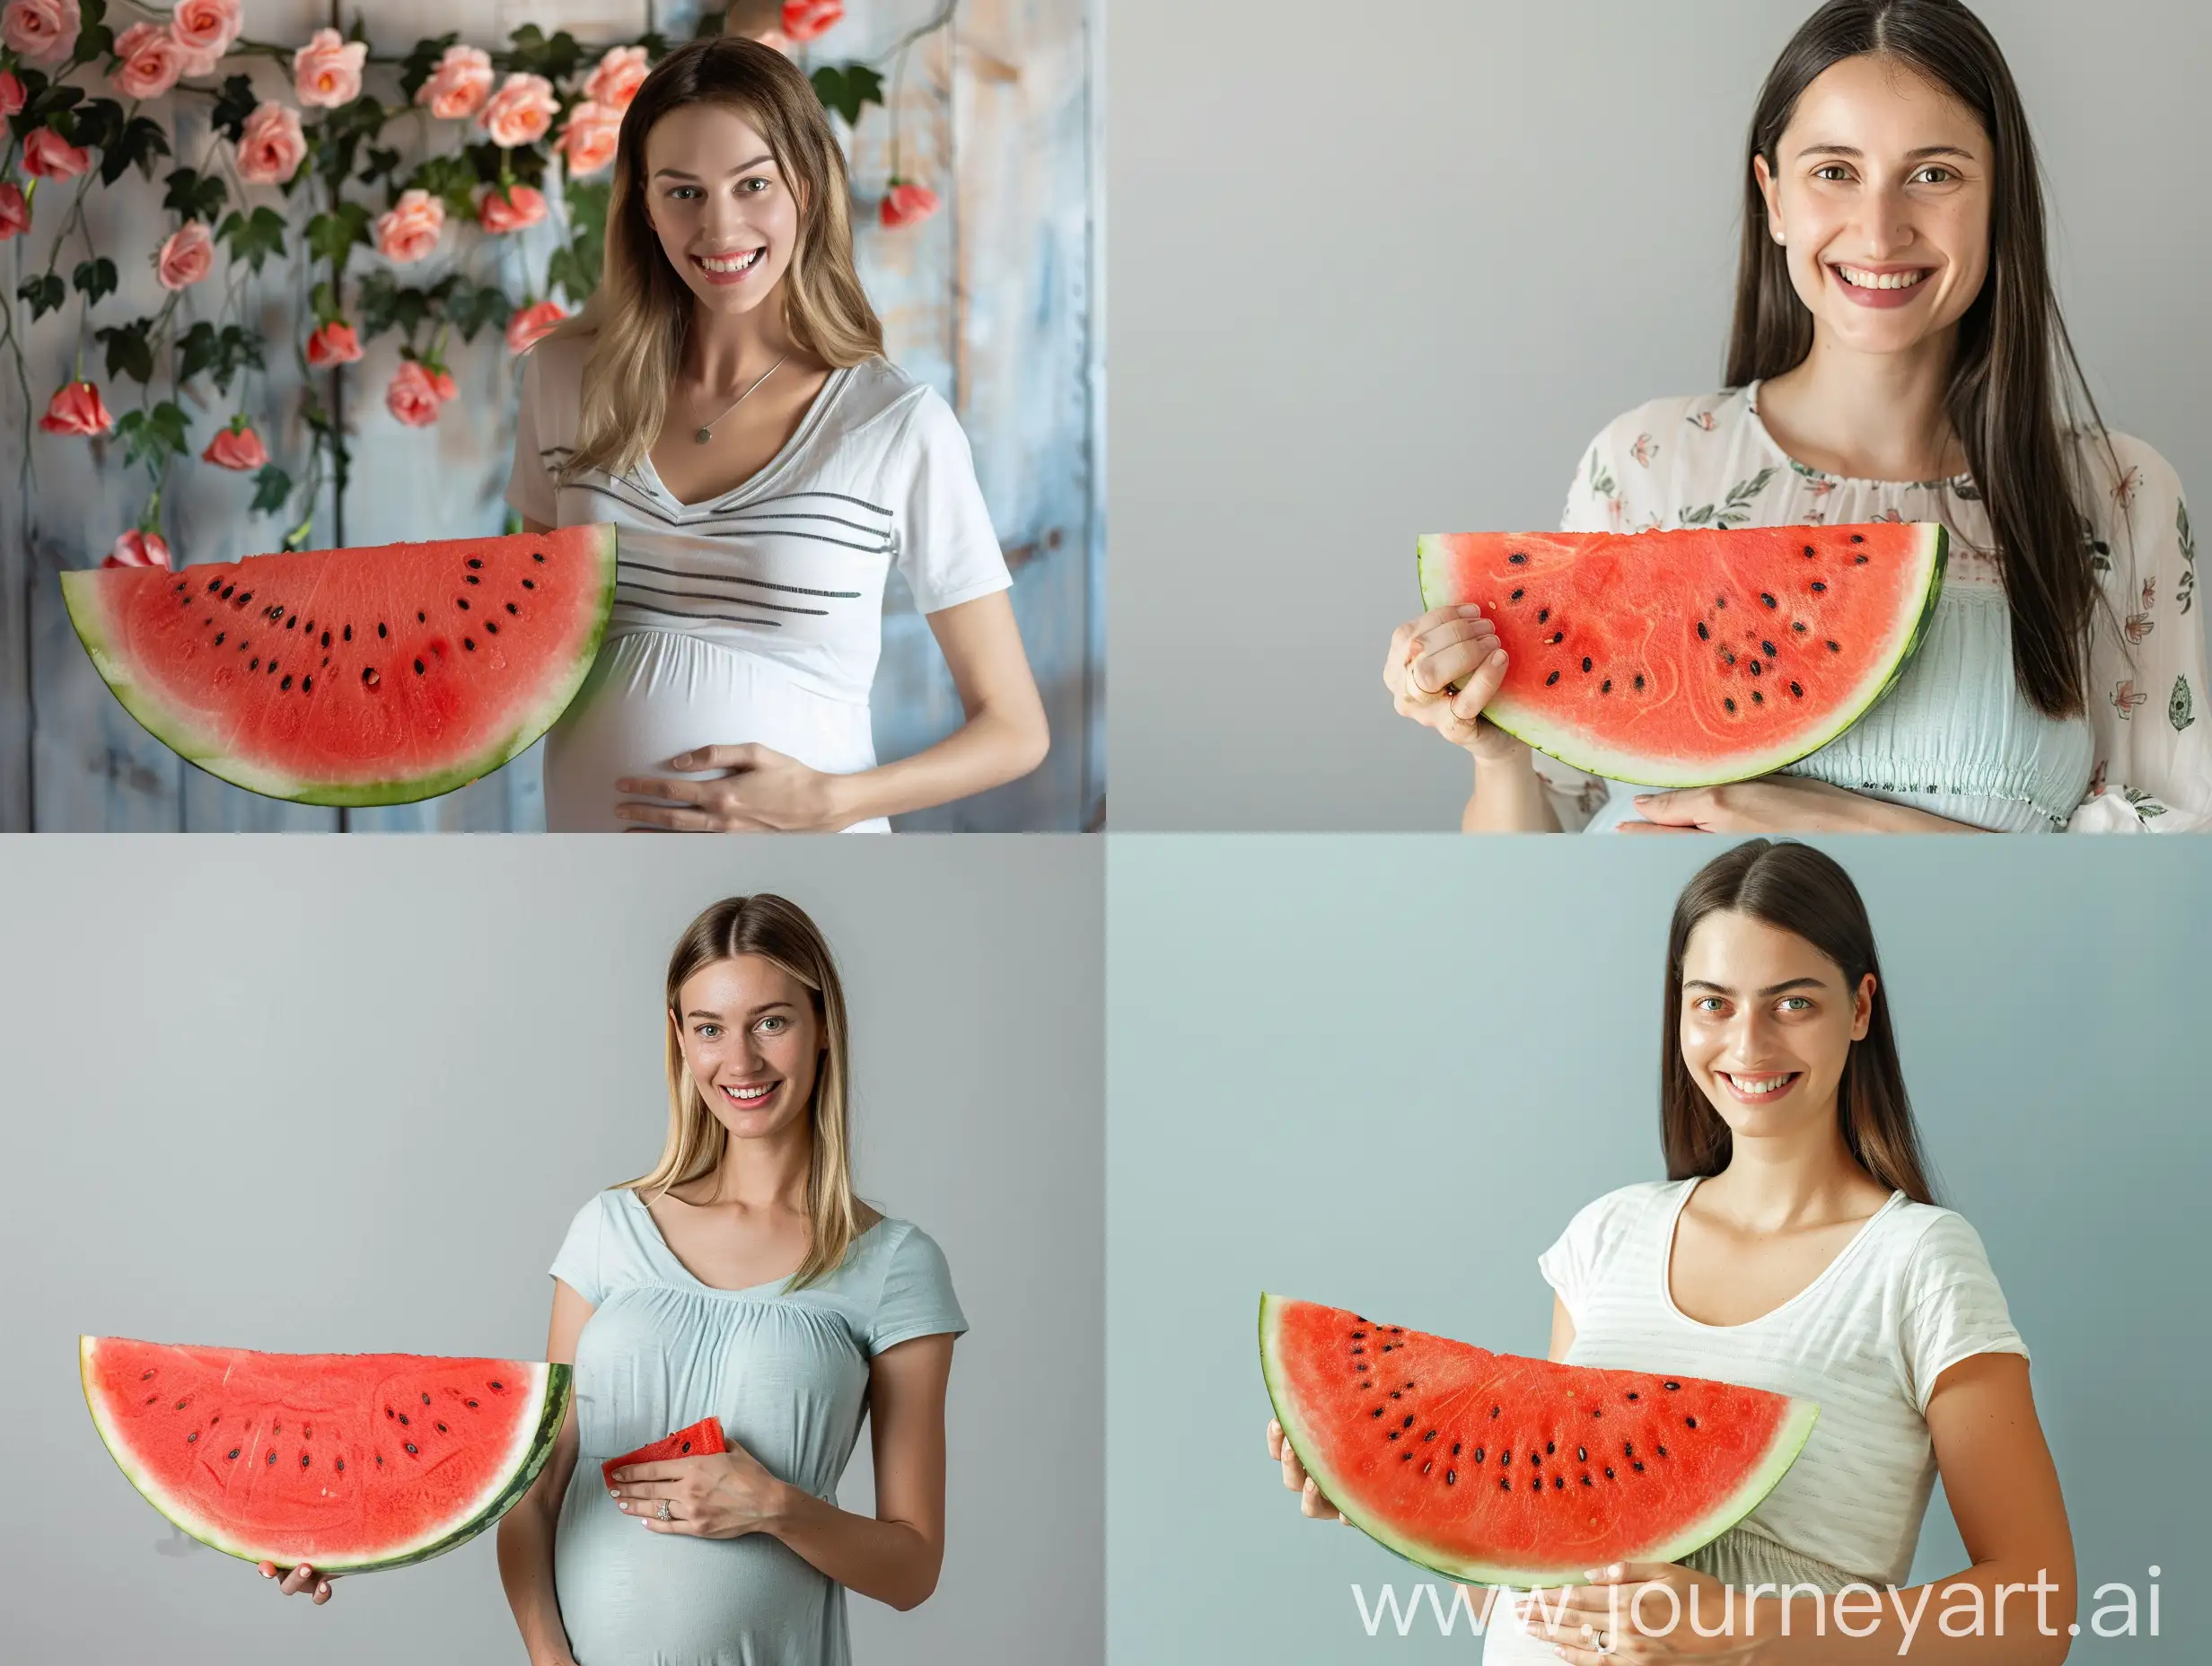 Advertising photo of a pregnant woman holding a slice of watermelon